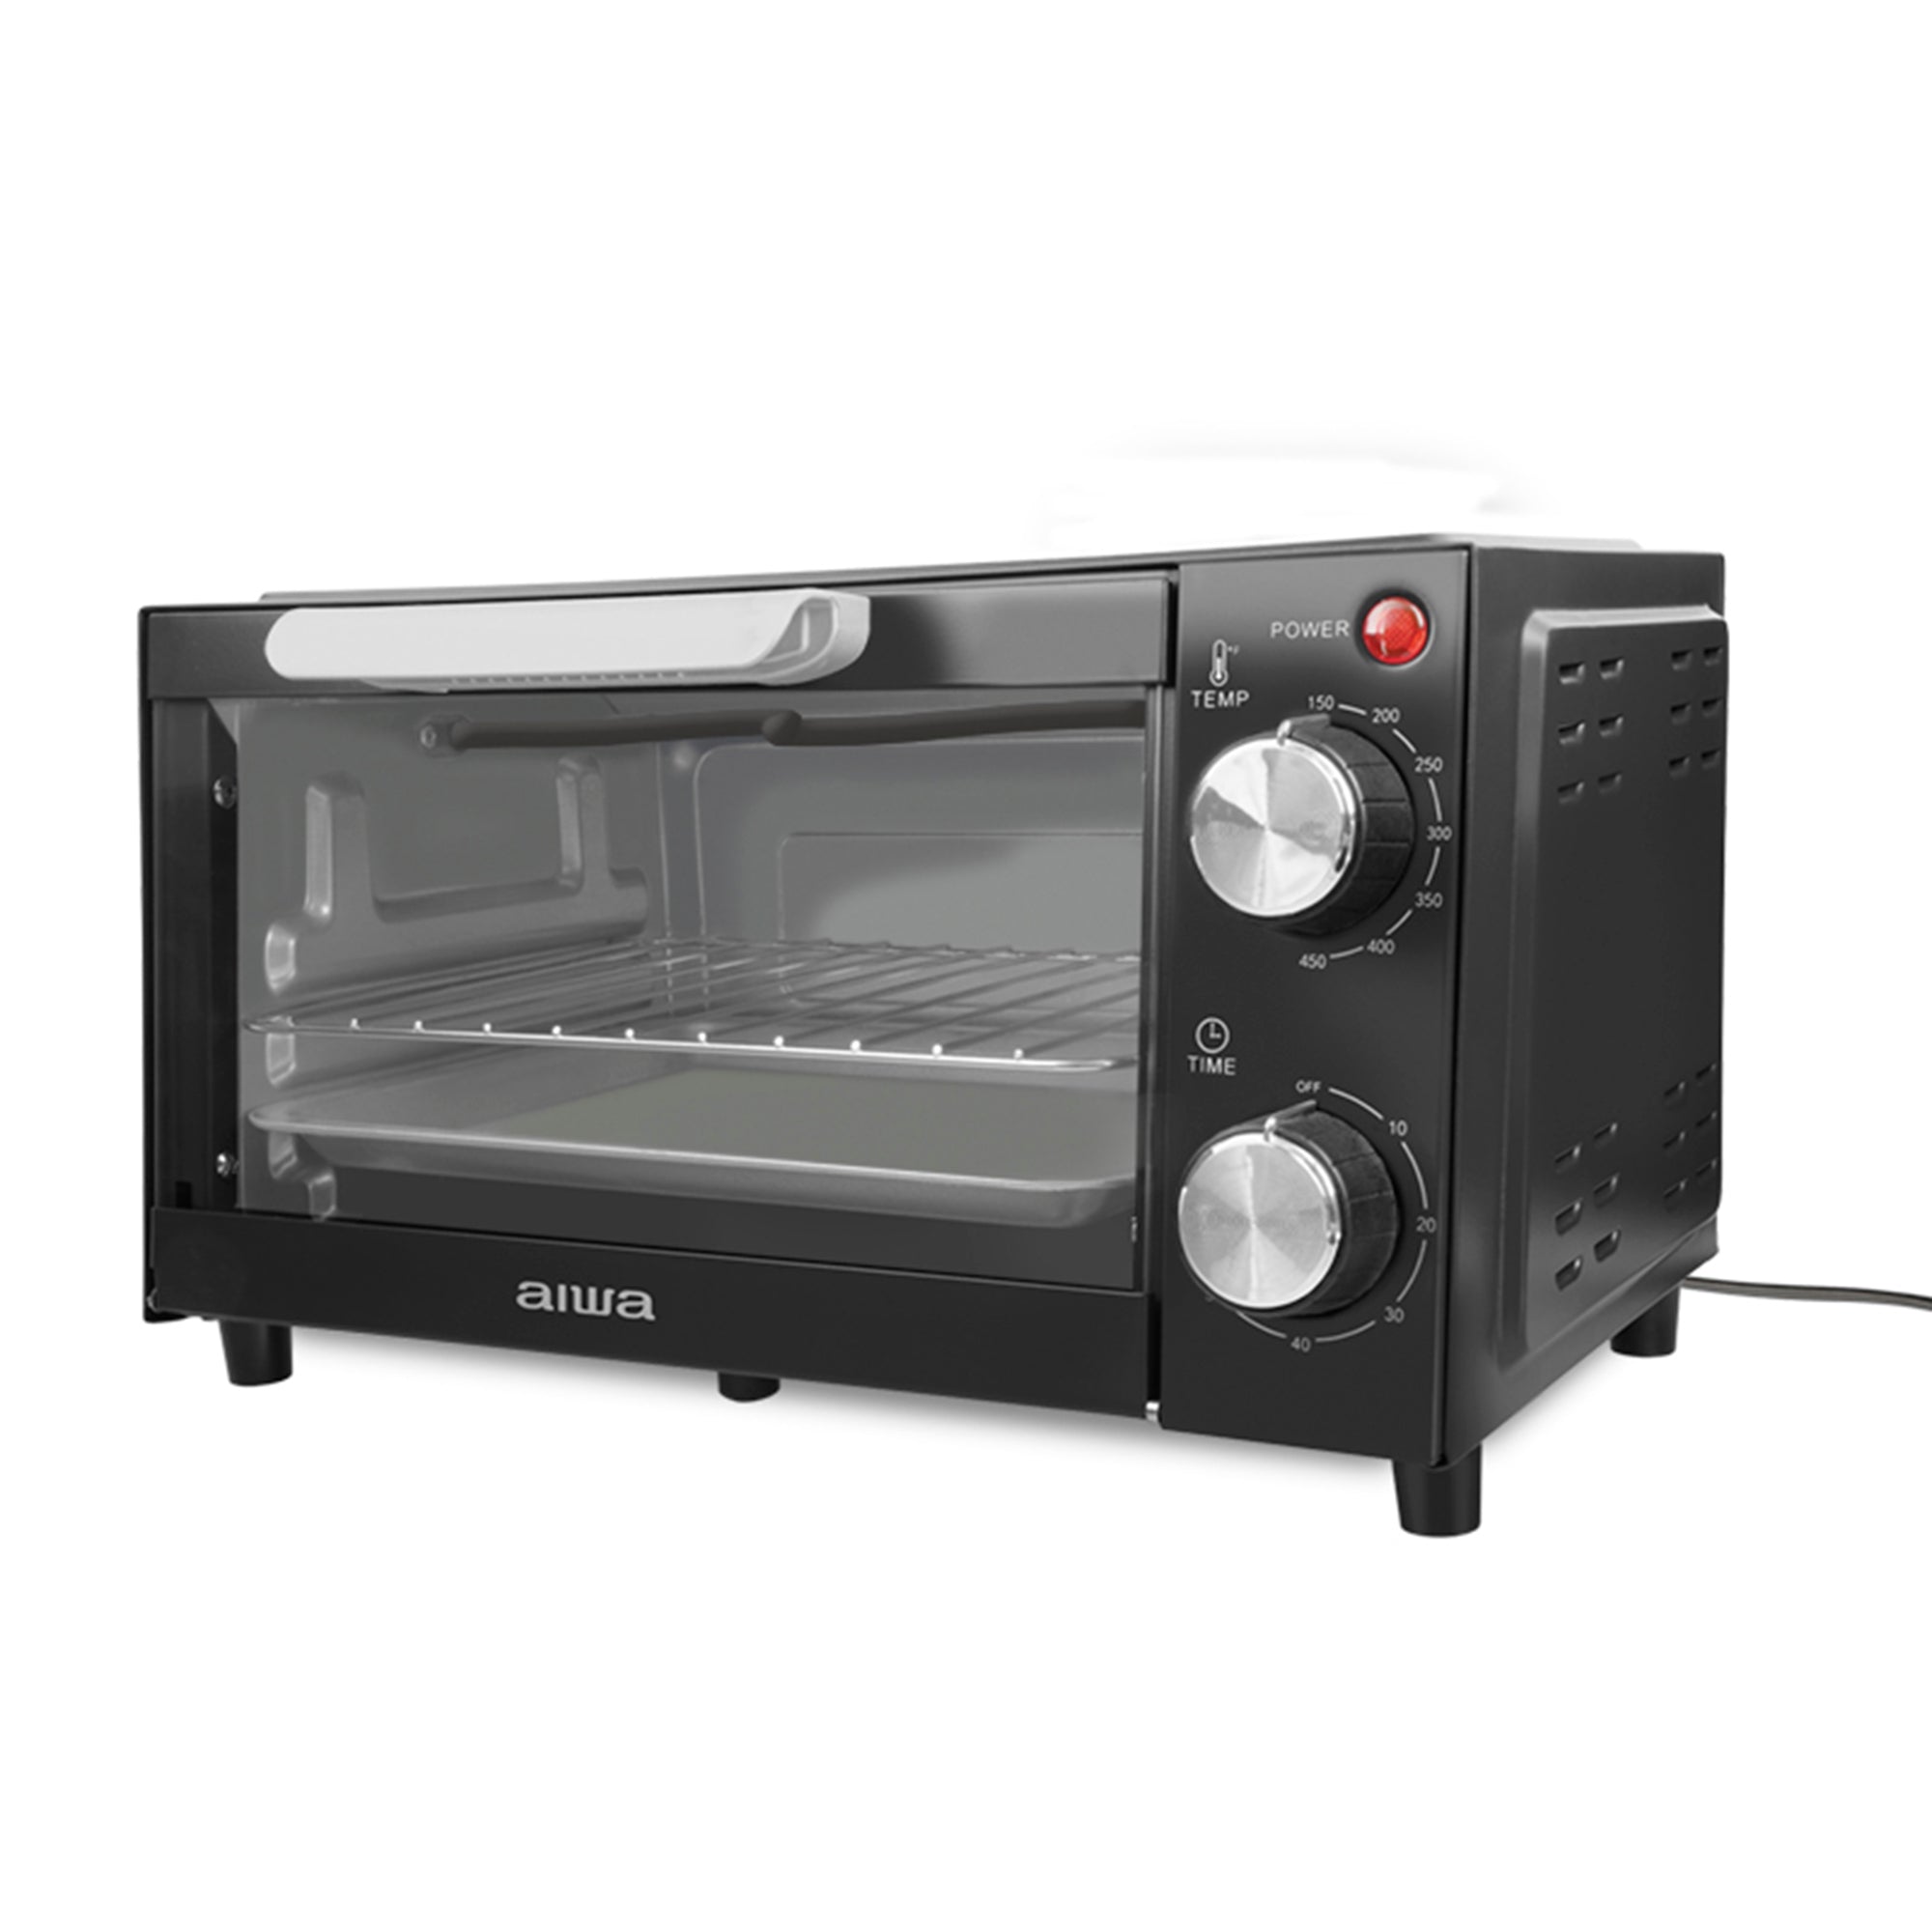 4-Slice Toaster Oven with Natural Convection, Bake, Broil, Toast